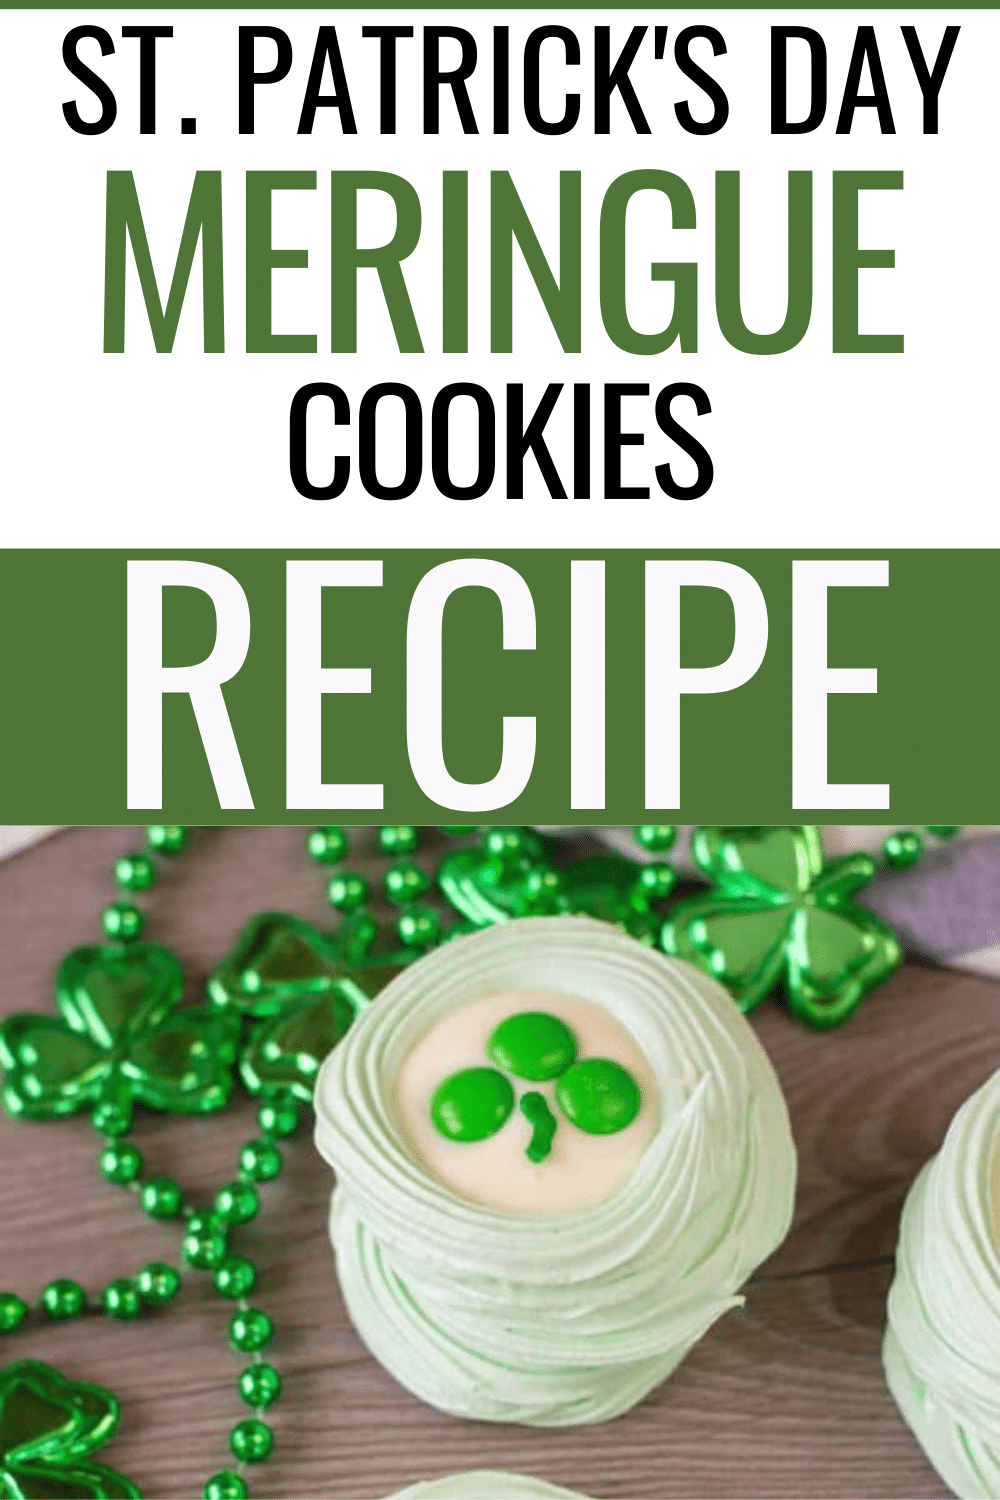 These St. Patrick’s Day Meringue Cookies are the perfect, light and airy goodies to help you celebrate this year. #stpatricksday #meringue #cookies via @wondermomwannab